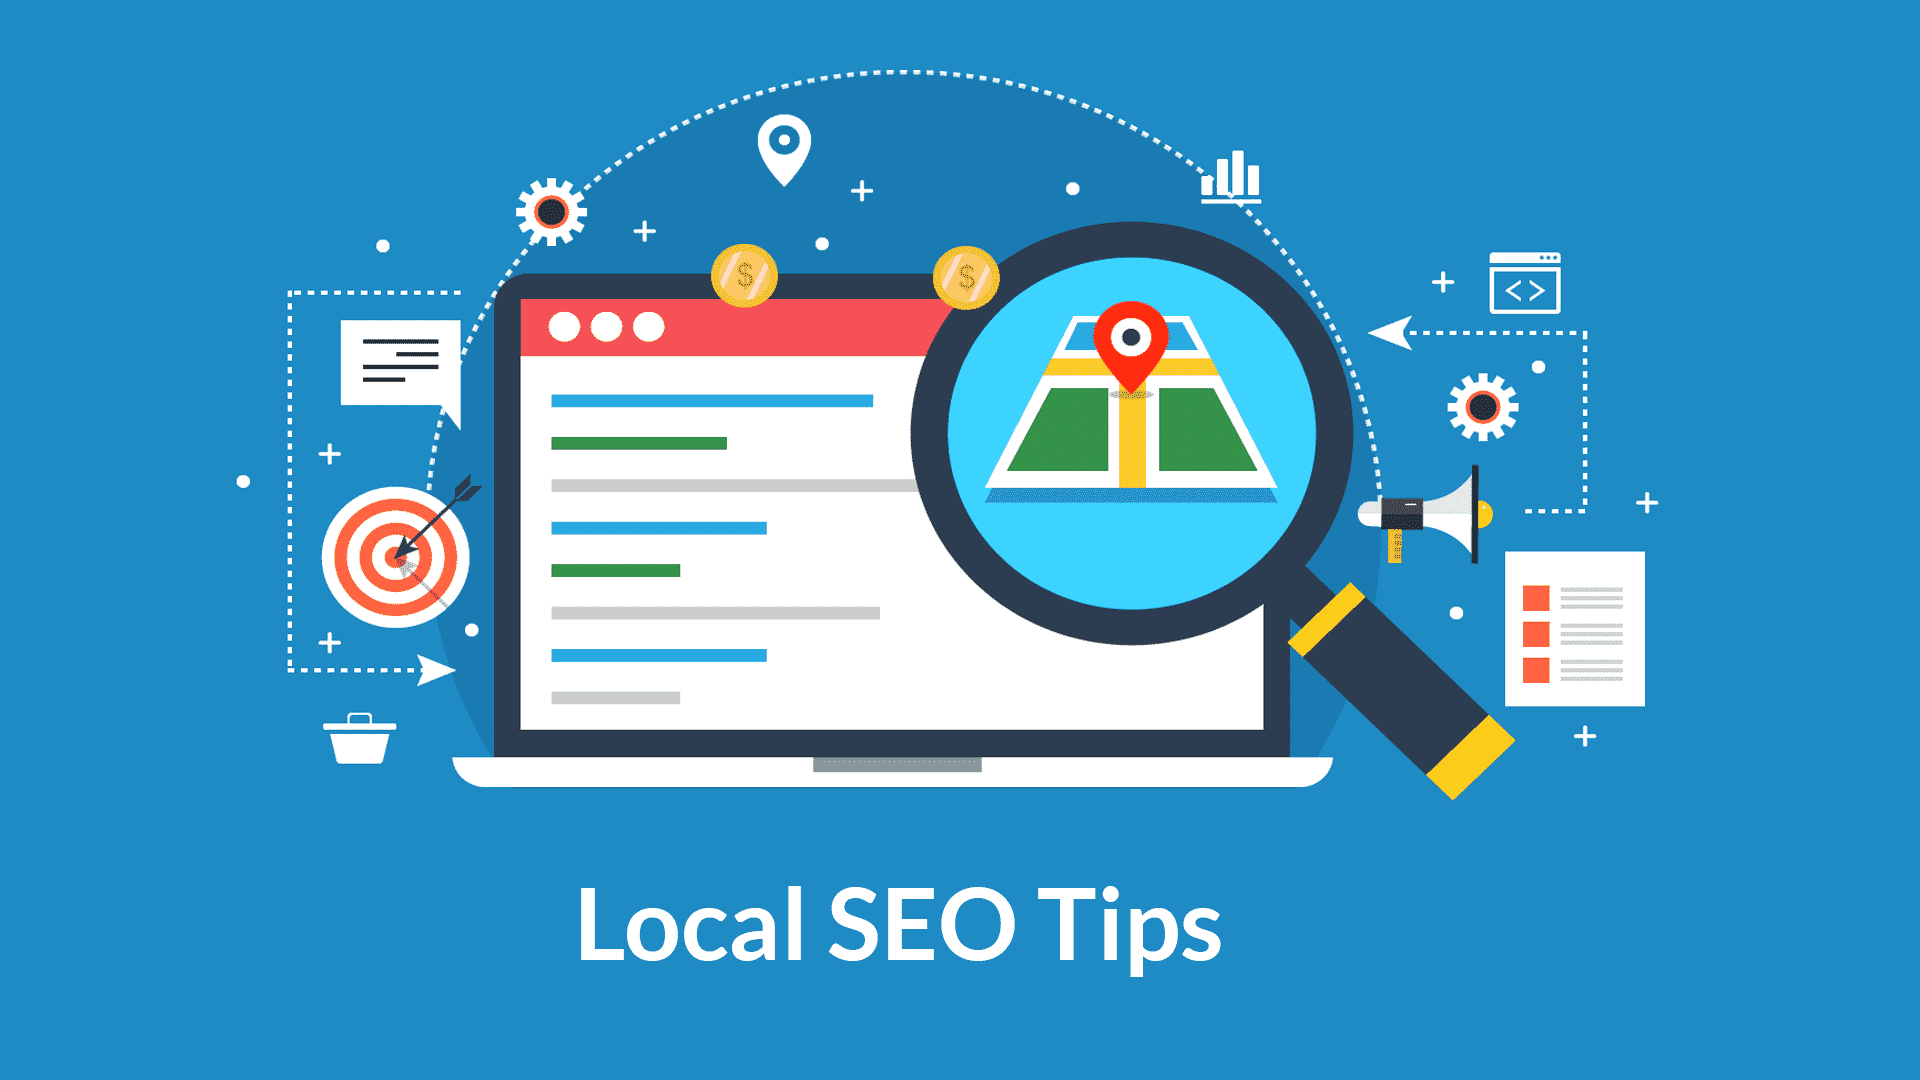 Local SEO: Learn to win your local businesses.